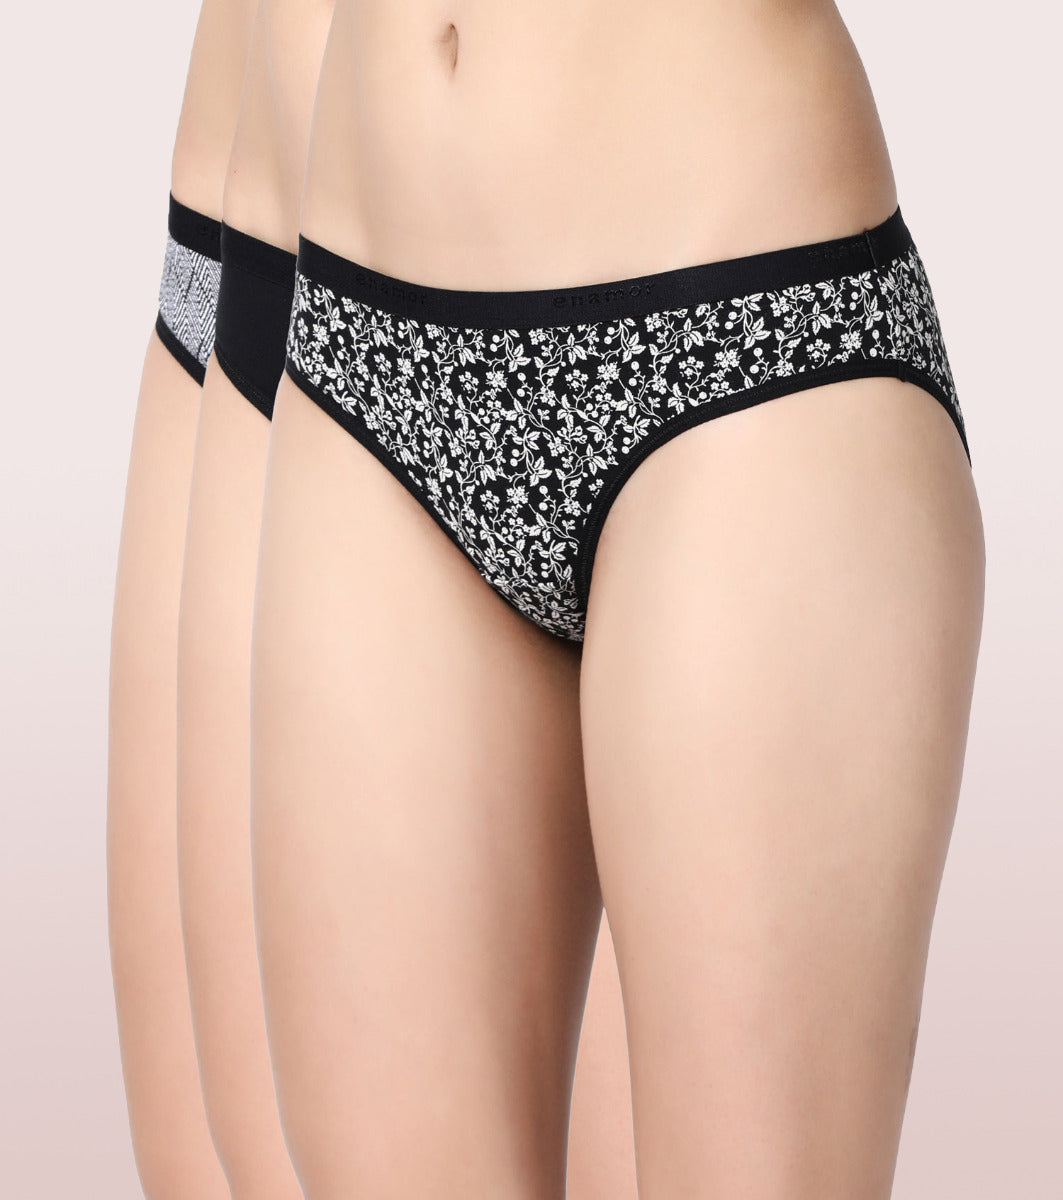 Low Waist Bikini Cotton Panty - Pack Of 3- Colors And Print May Vary